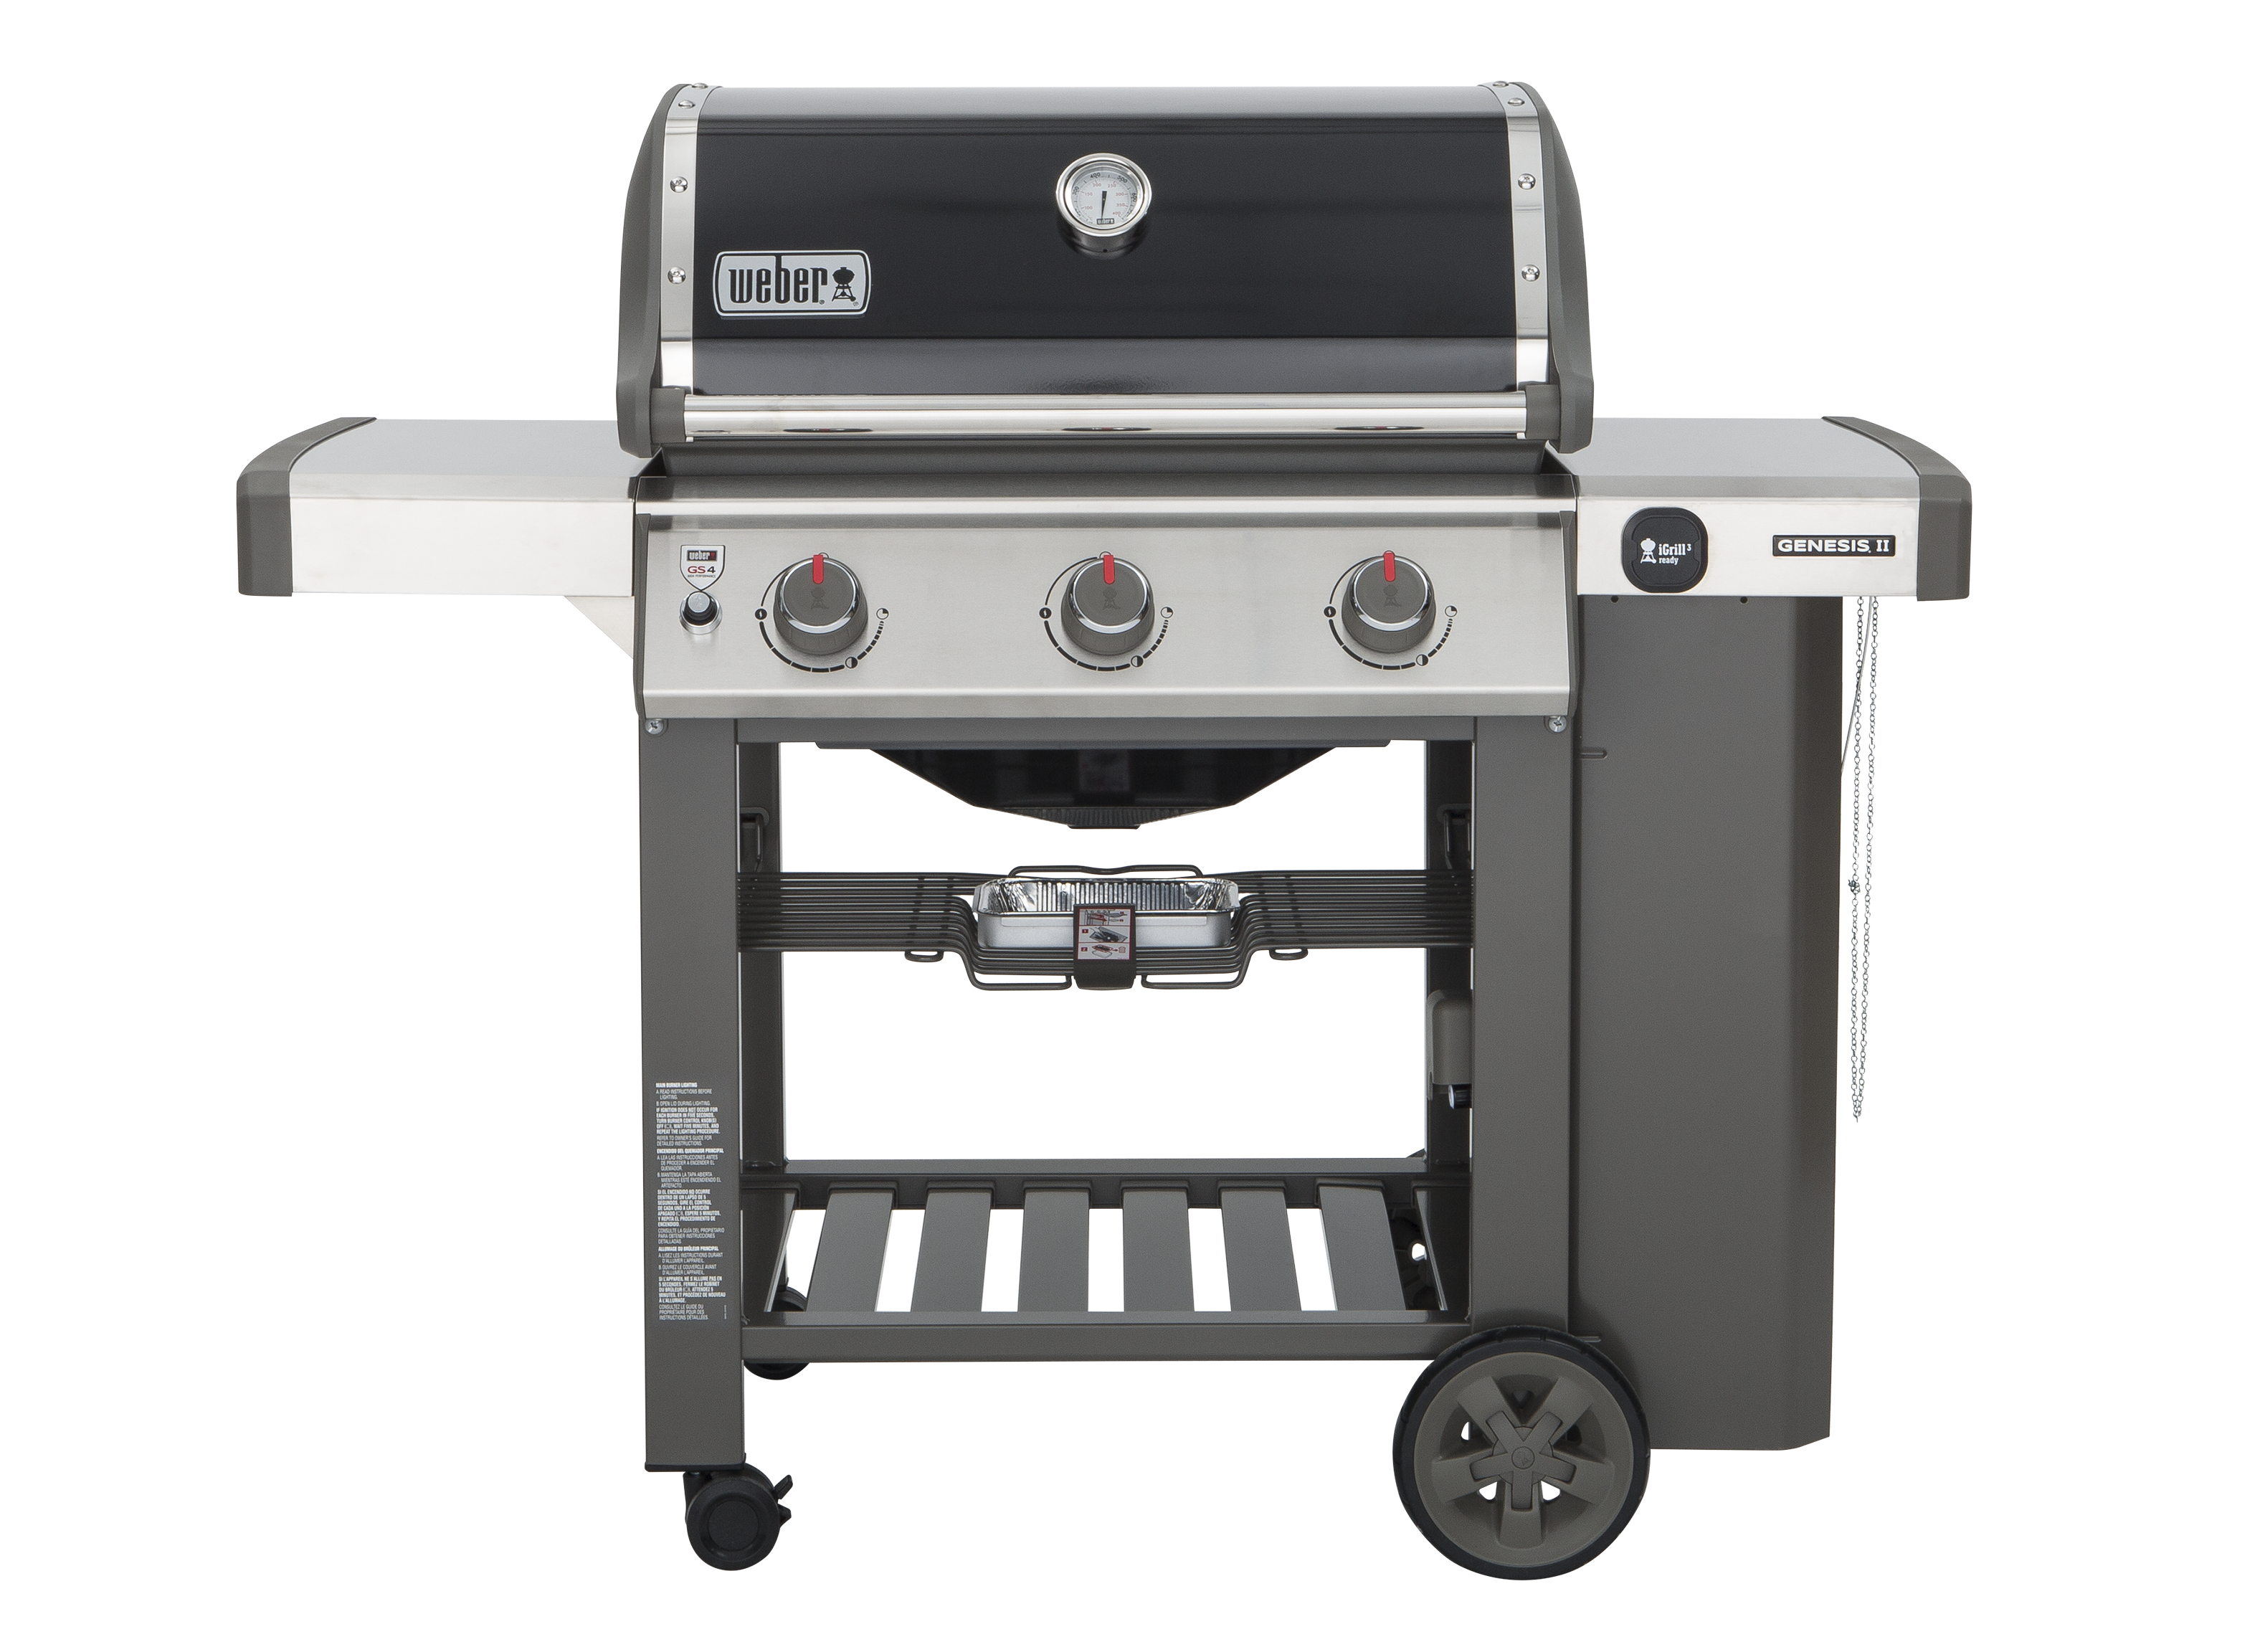 software bund at straffe Weber Genesis II E-310 Grill Review - Consumer Reports